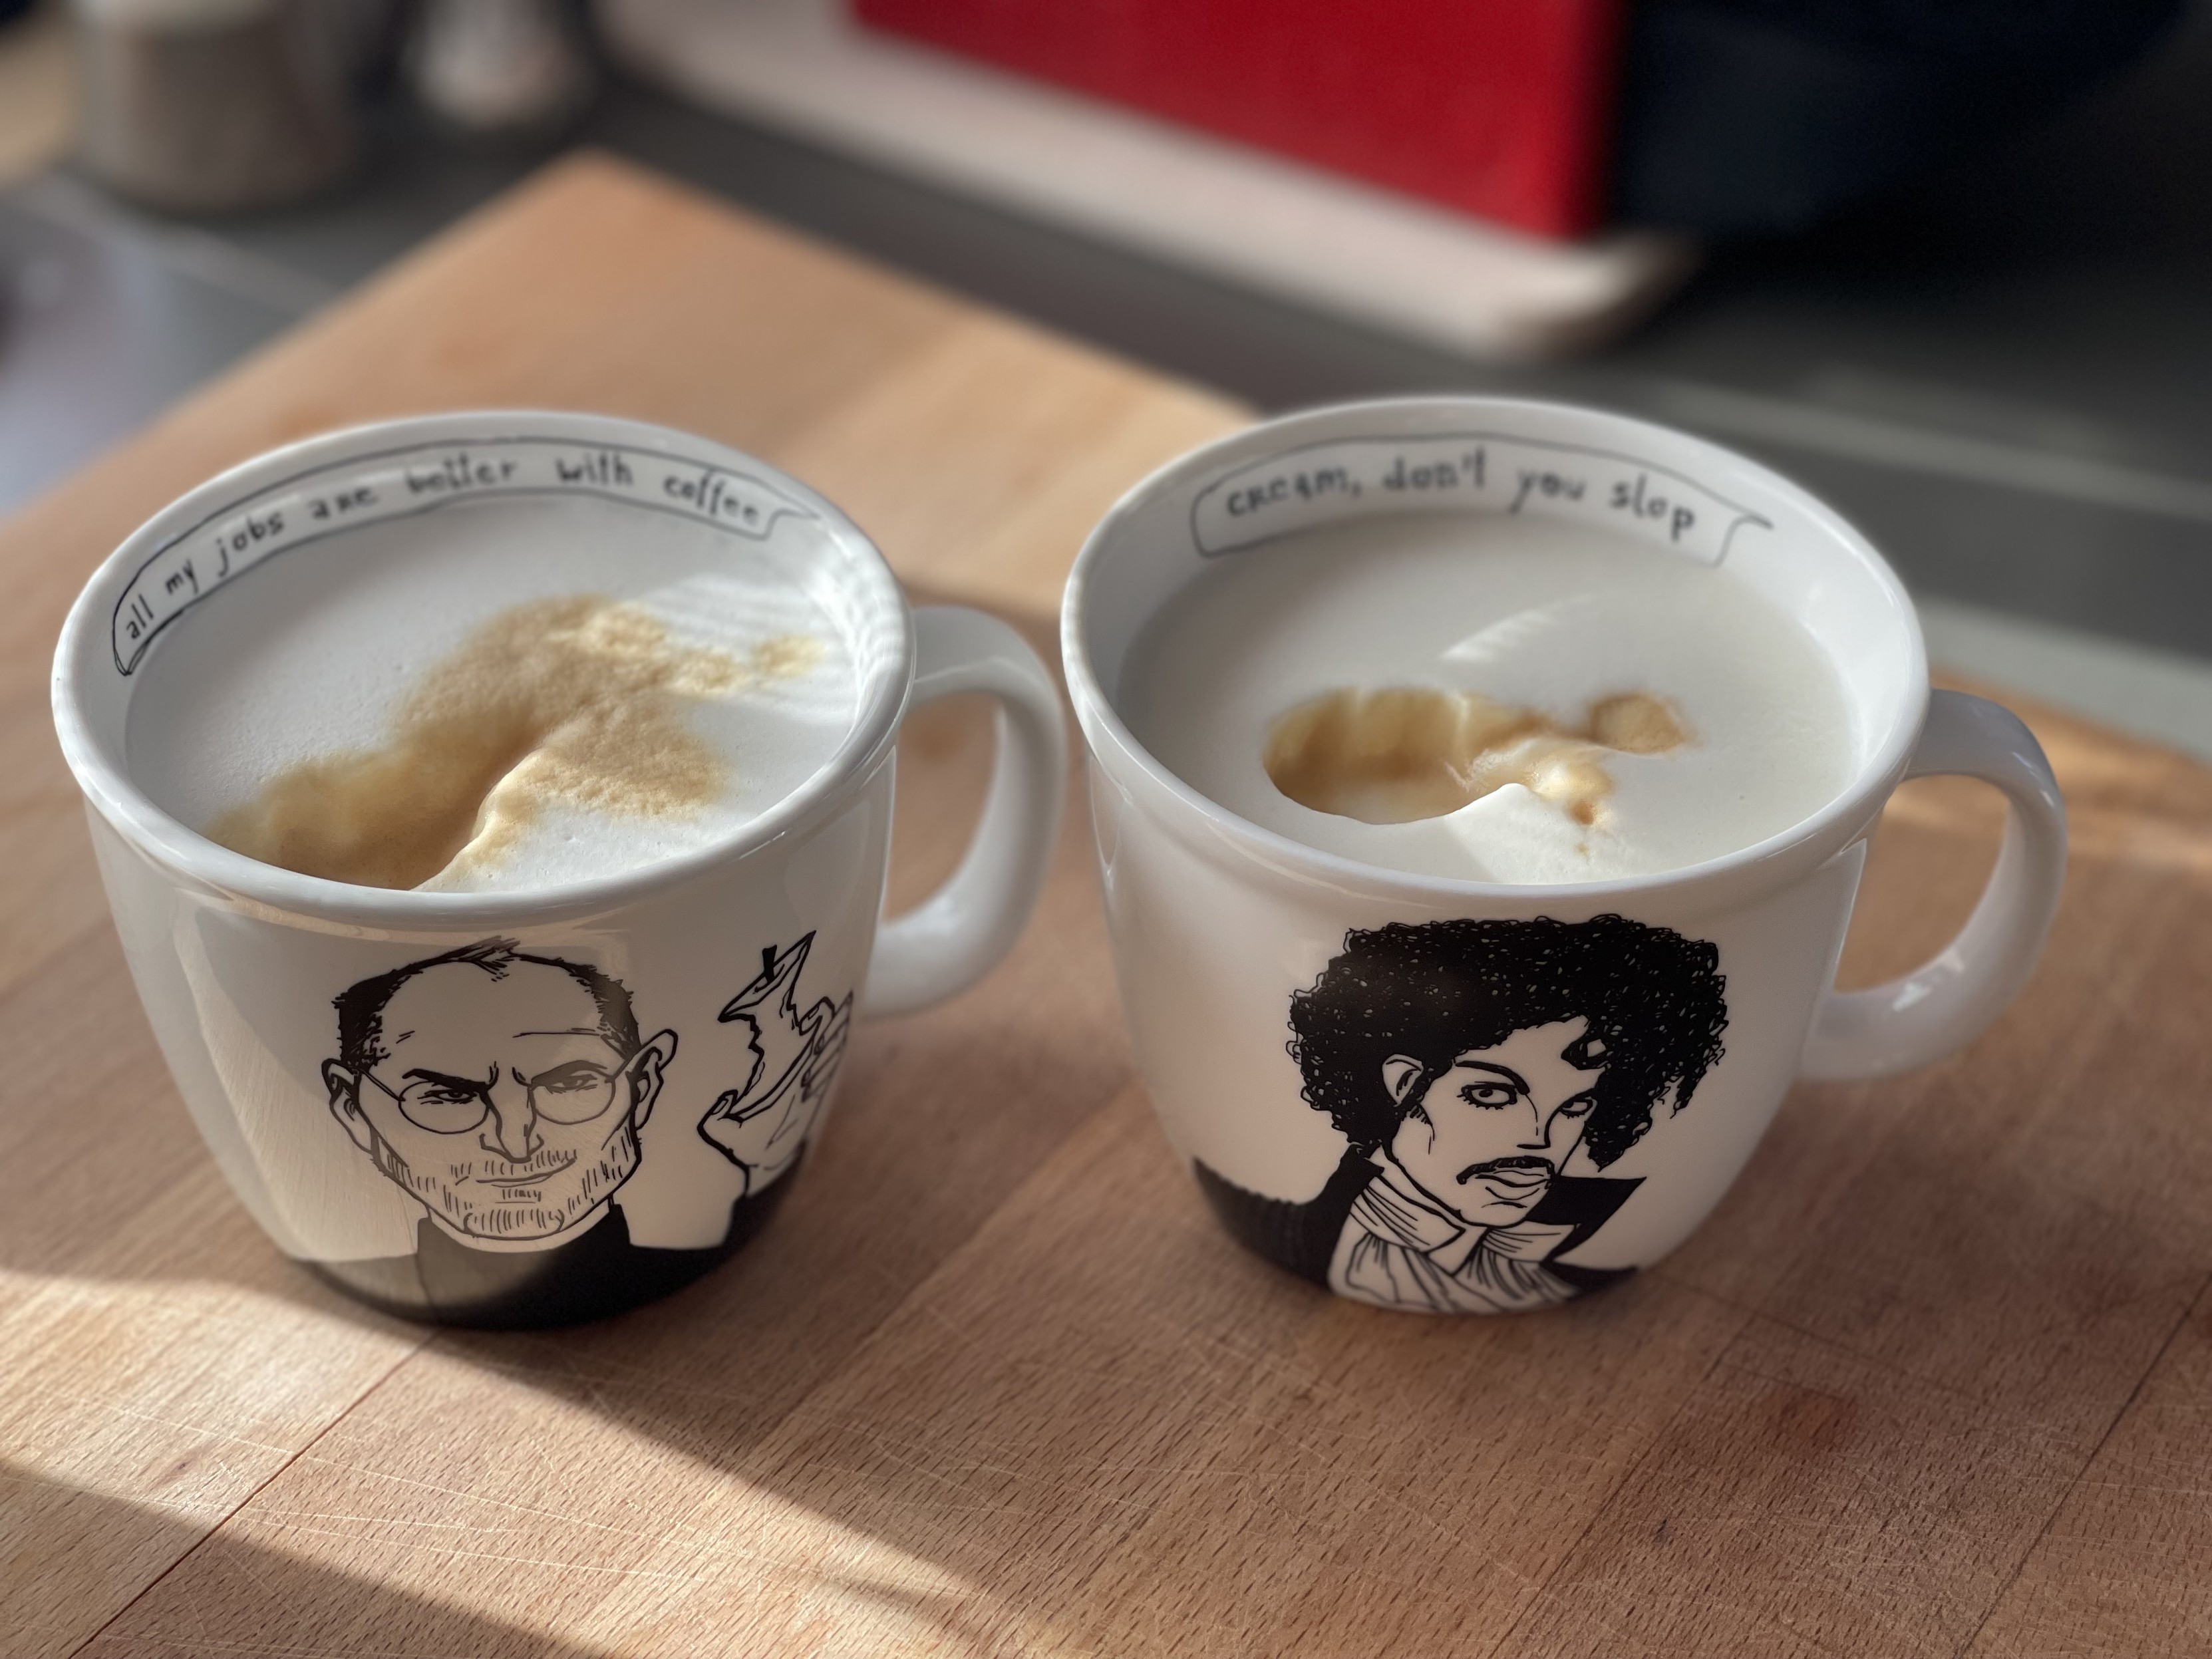 Two coffee mugs with illustrated portraits on them and text, sitting on a wooden surface with sunlight casting shadows.
Left illustration is Steve Jobs holding an Apple corpse. Text inside the mug seam is: all my jobs are better with coffee. 

Right side is Prince and the text on the seam is: Cream, don't you slop 